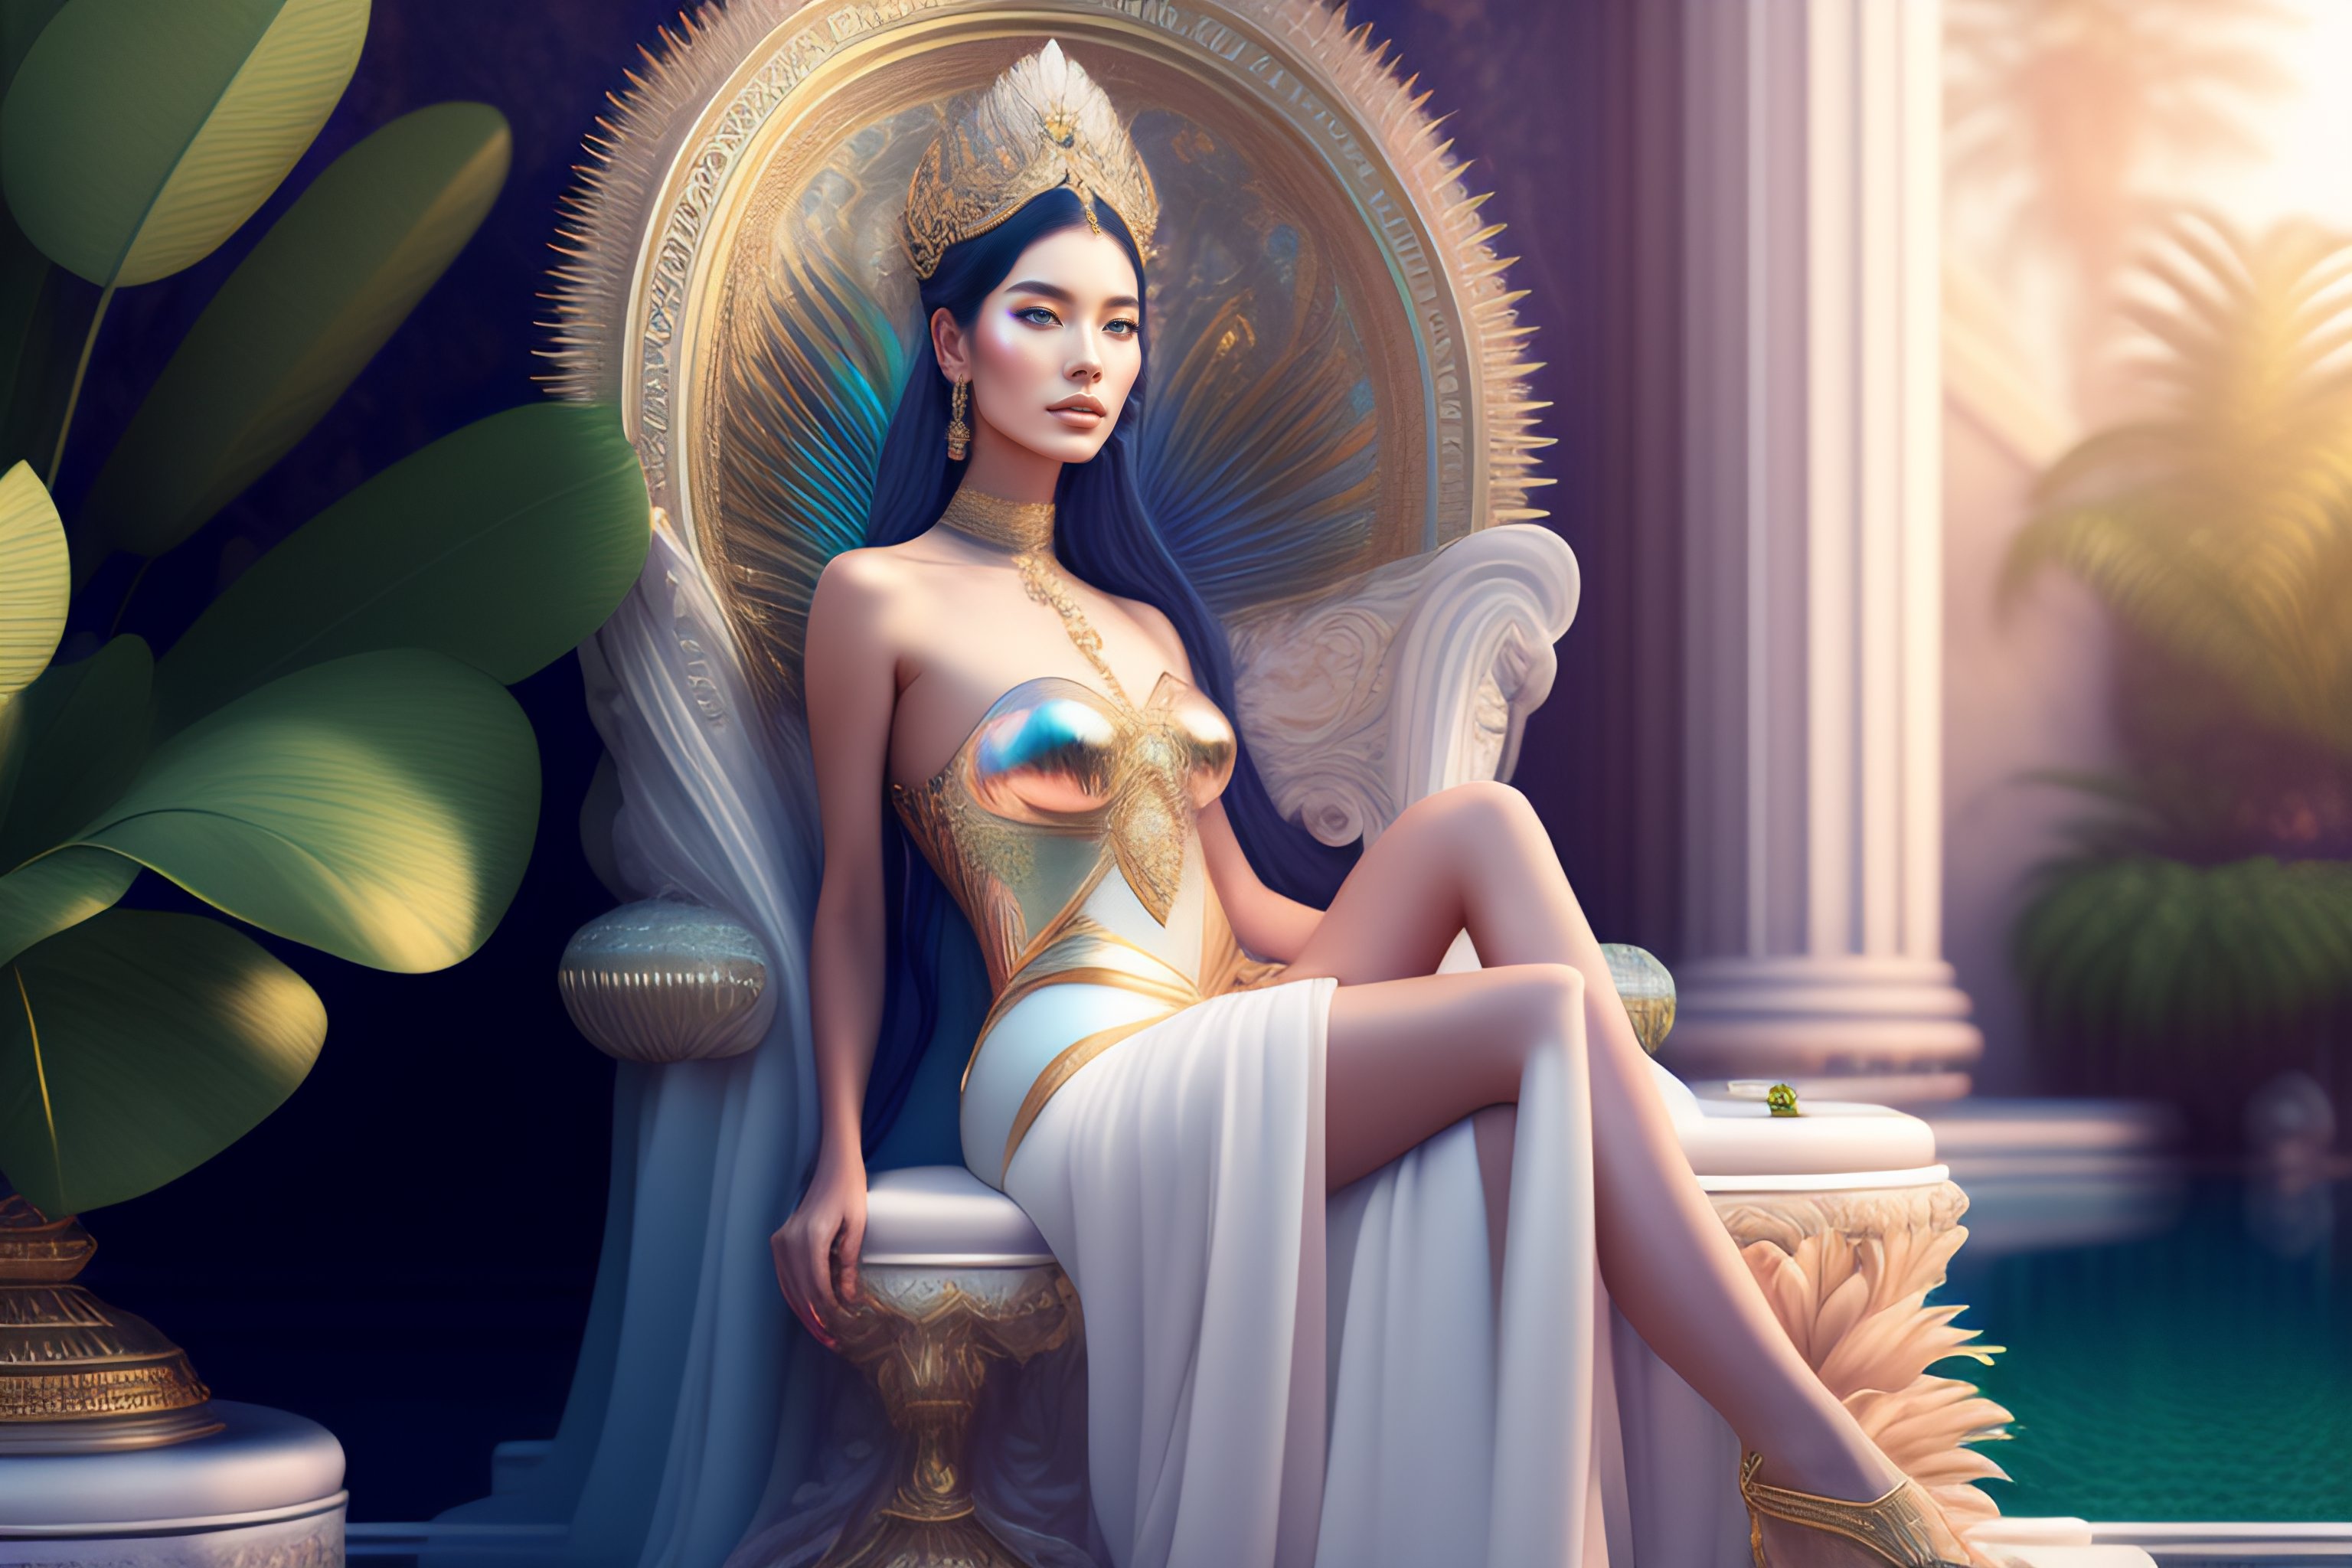 Lexica Beeple Masterpiece Hyperrealistic Surrealism Beautiful Pale Goddess Sitting On An